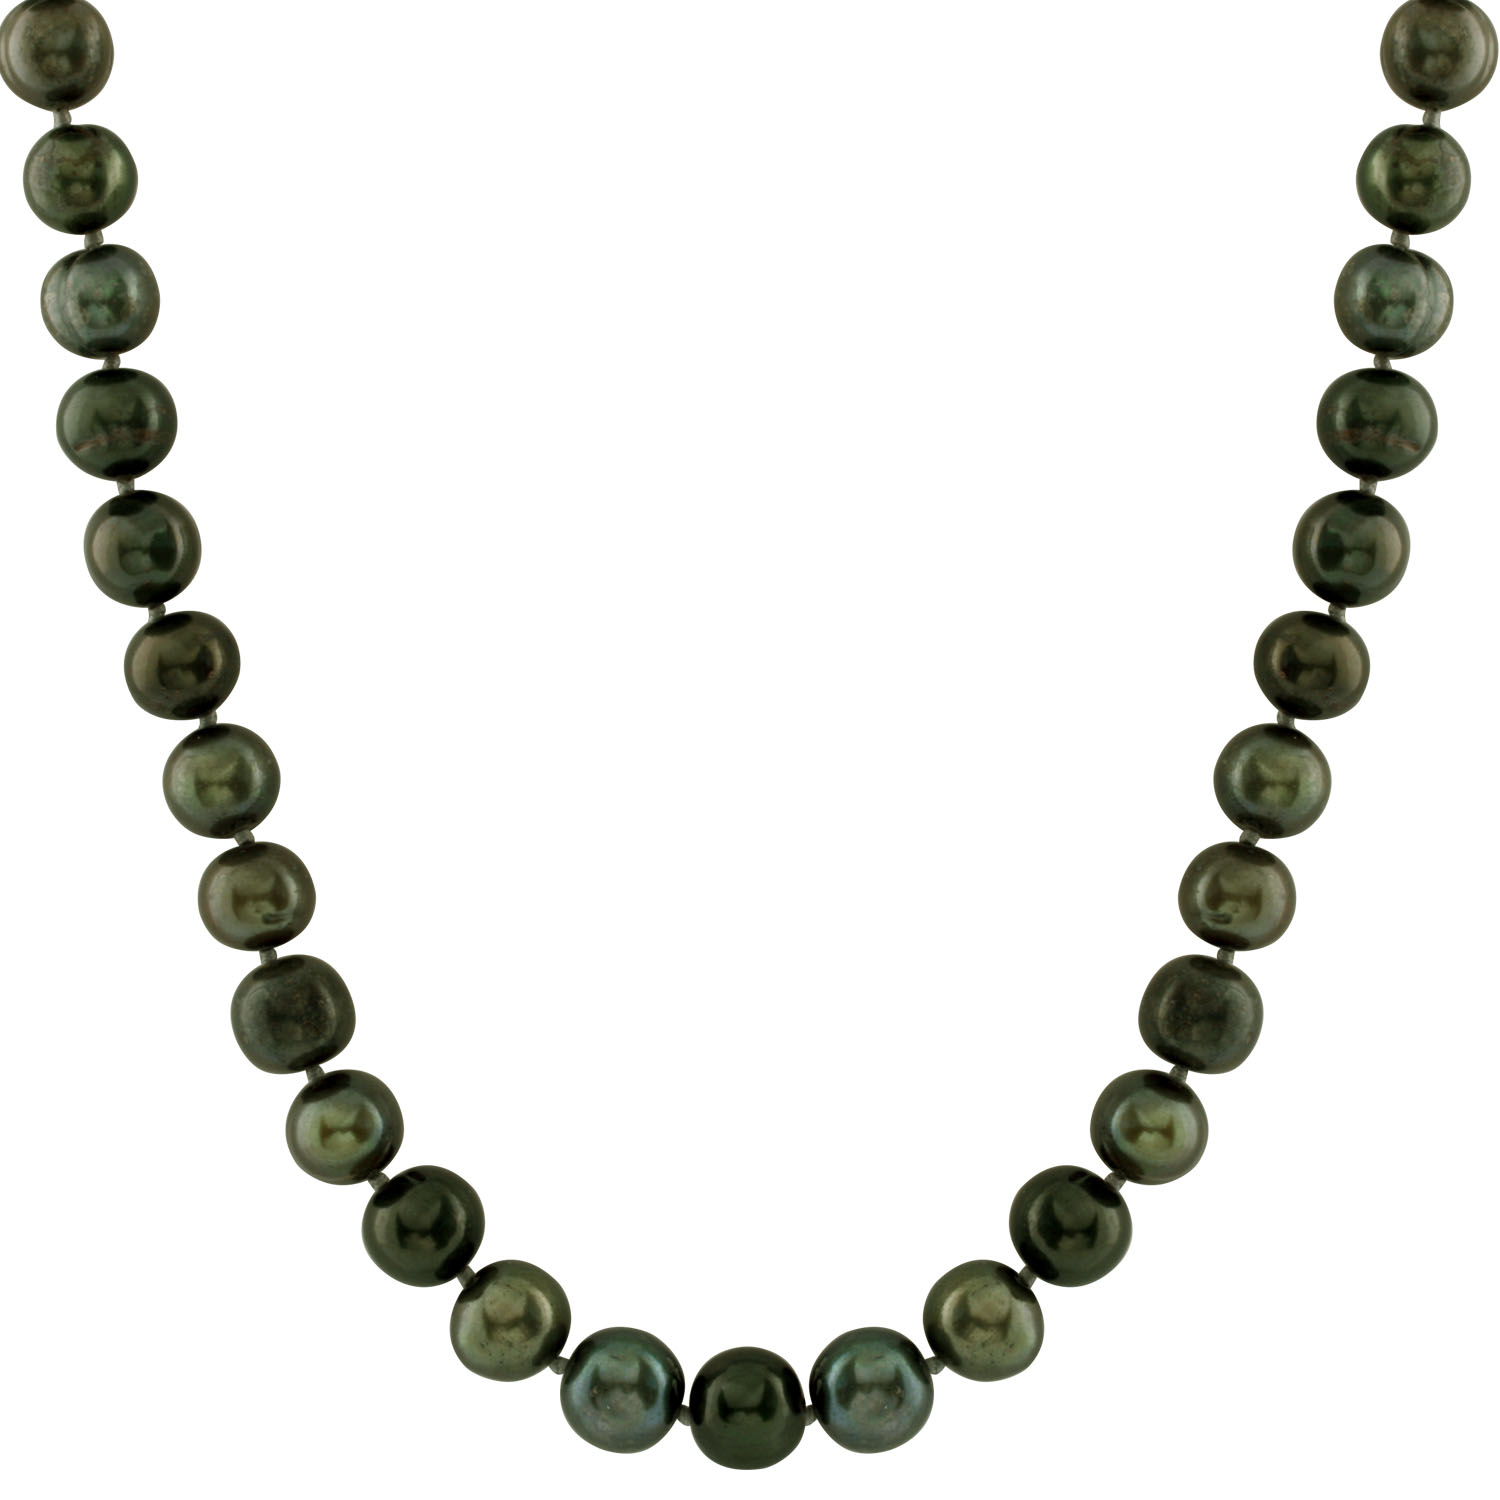 Green freshwater pearl necklace